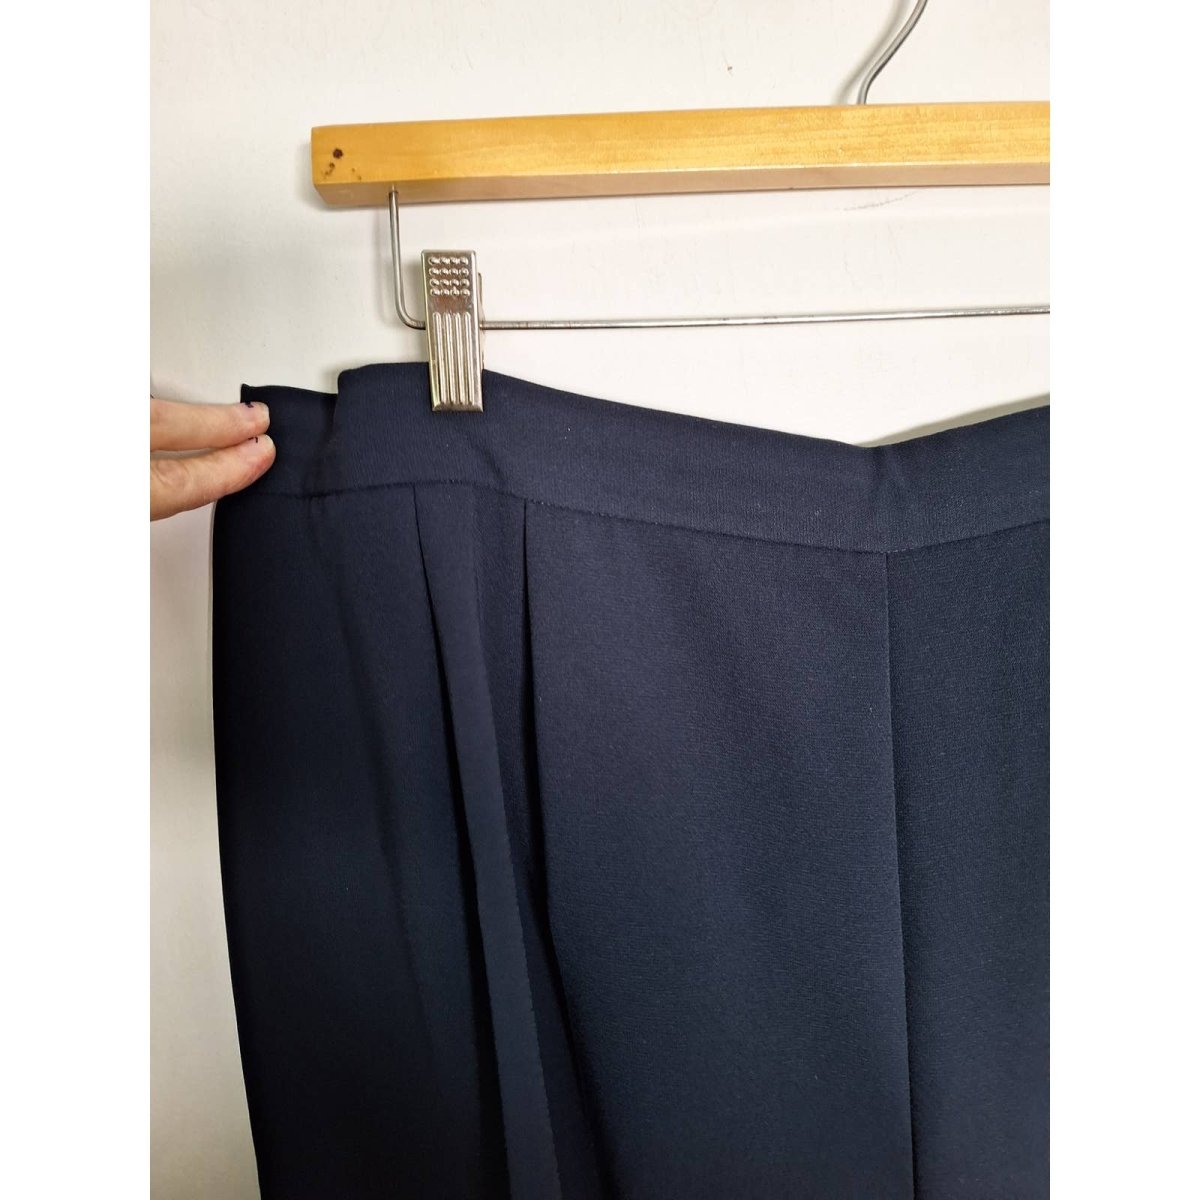 90s Navy Blue Flowy Dress Pants Size 2X/3X Waist 40" to 44" - themallvintage The Mall Vintage